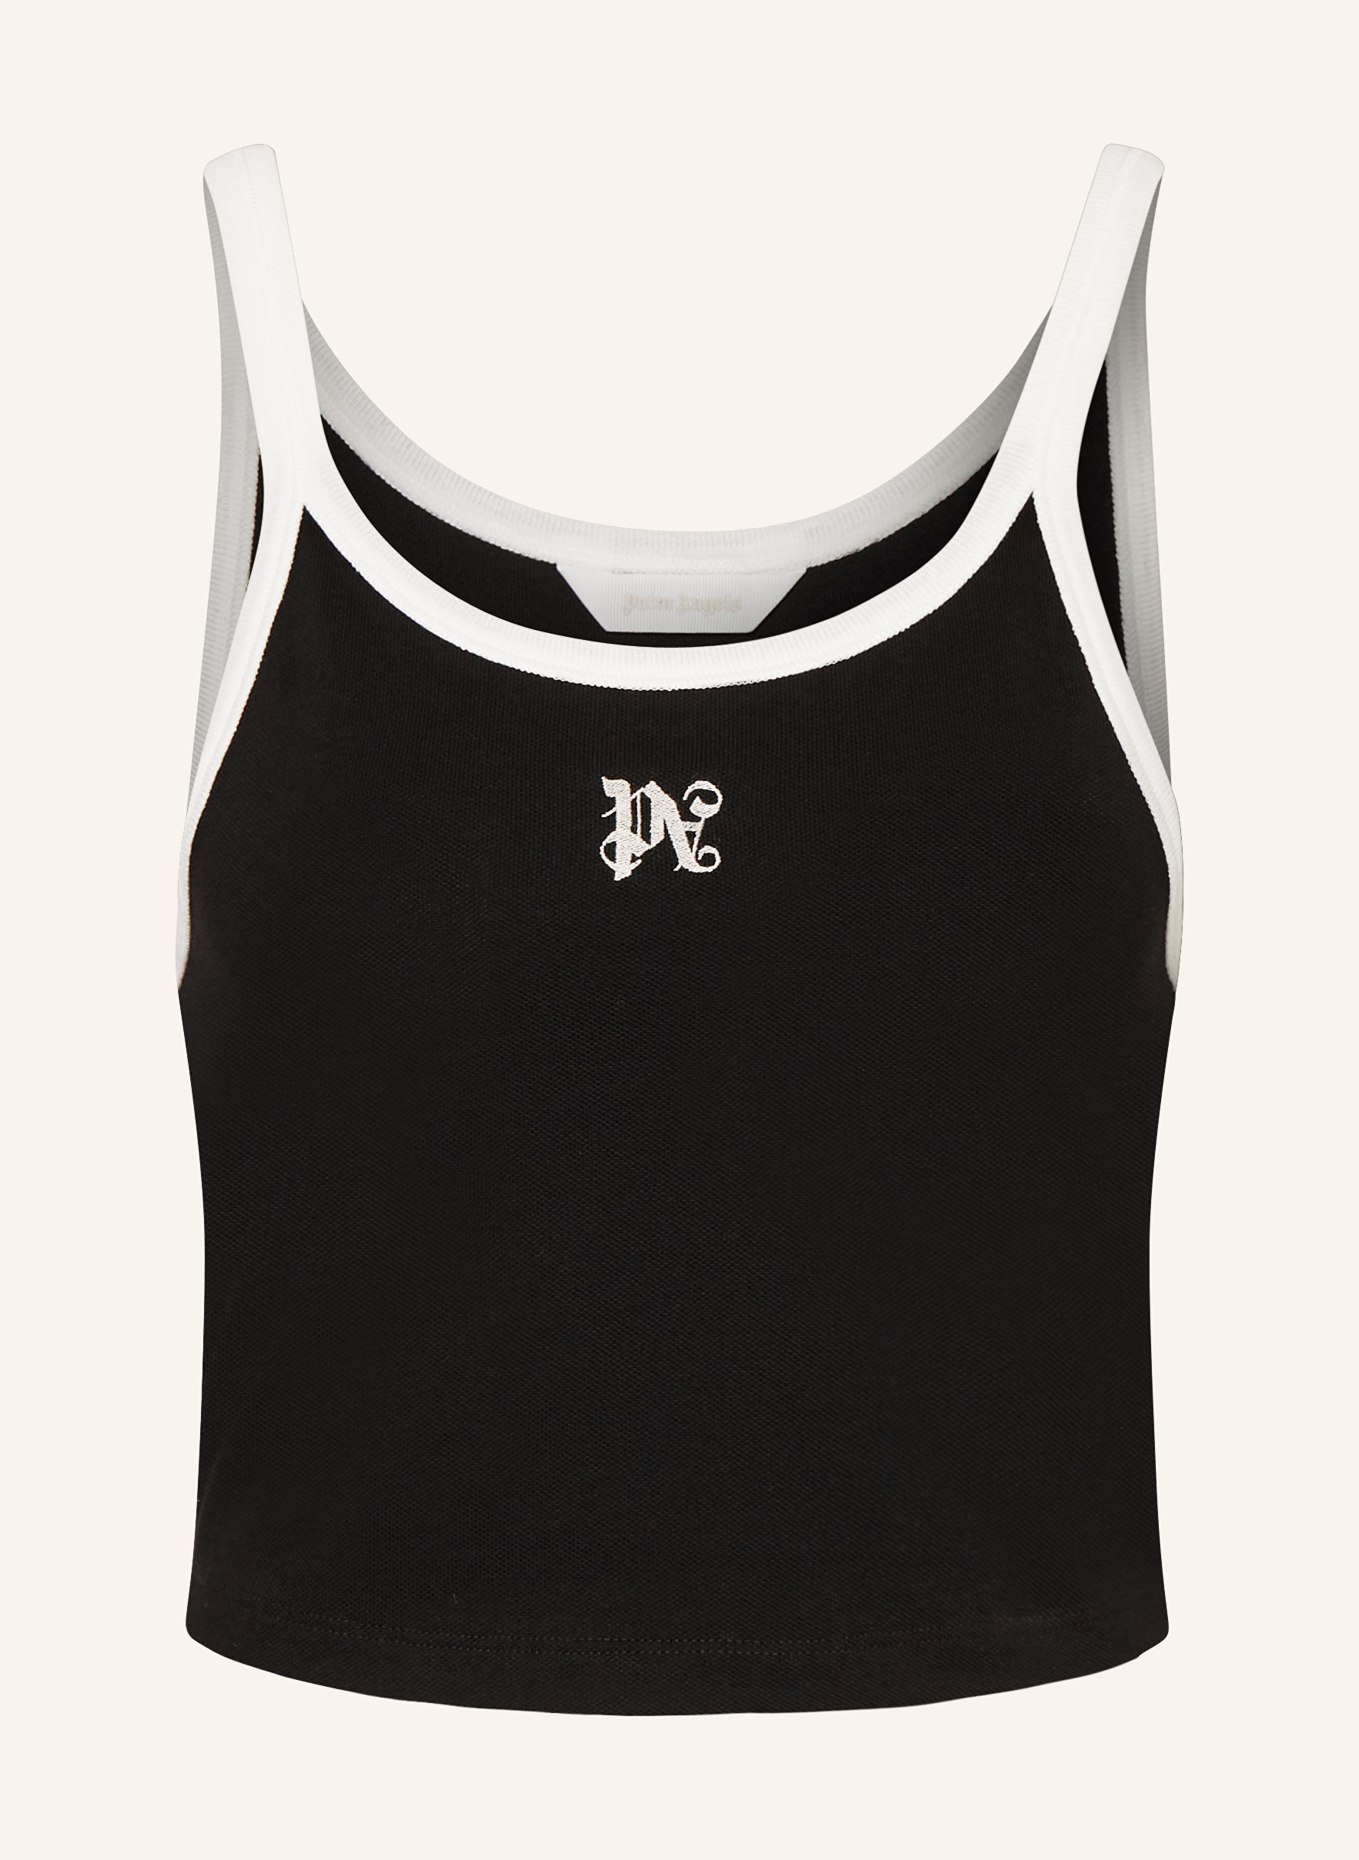 Palm Angels Tank top in black/ white